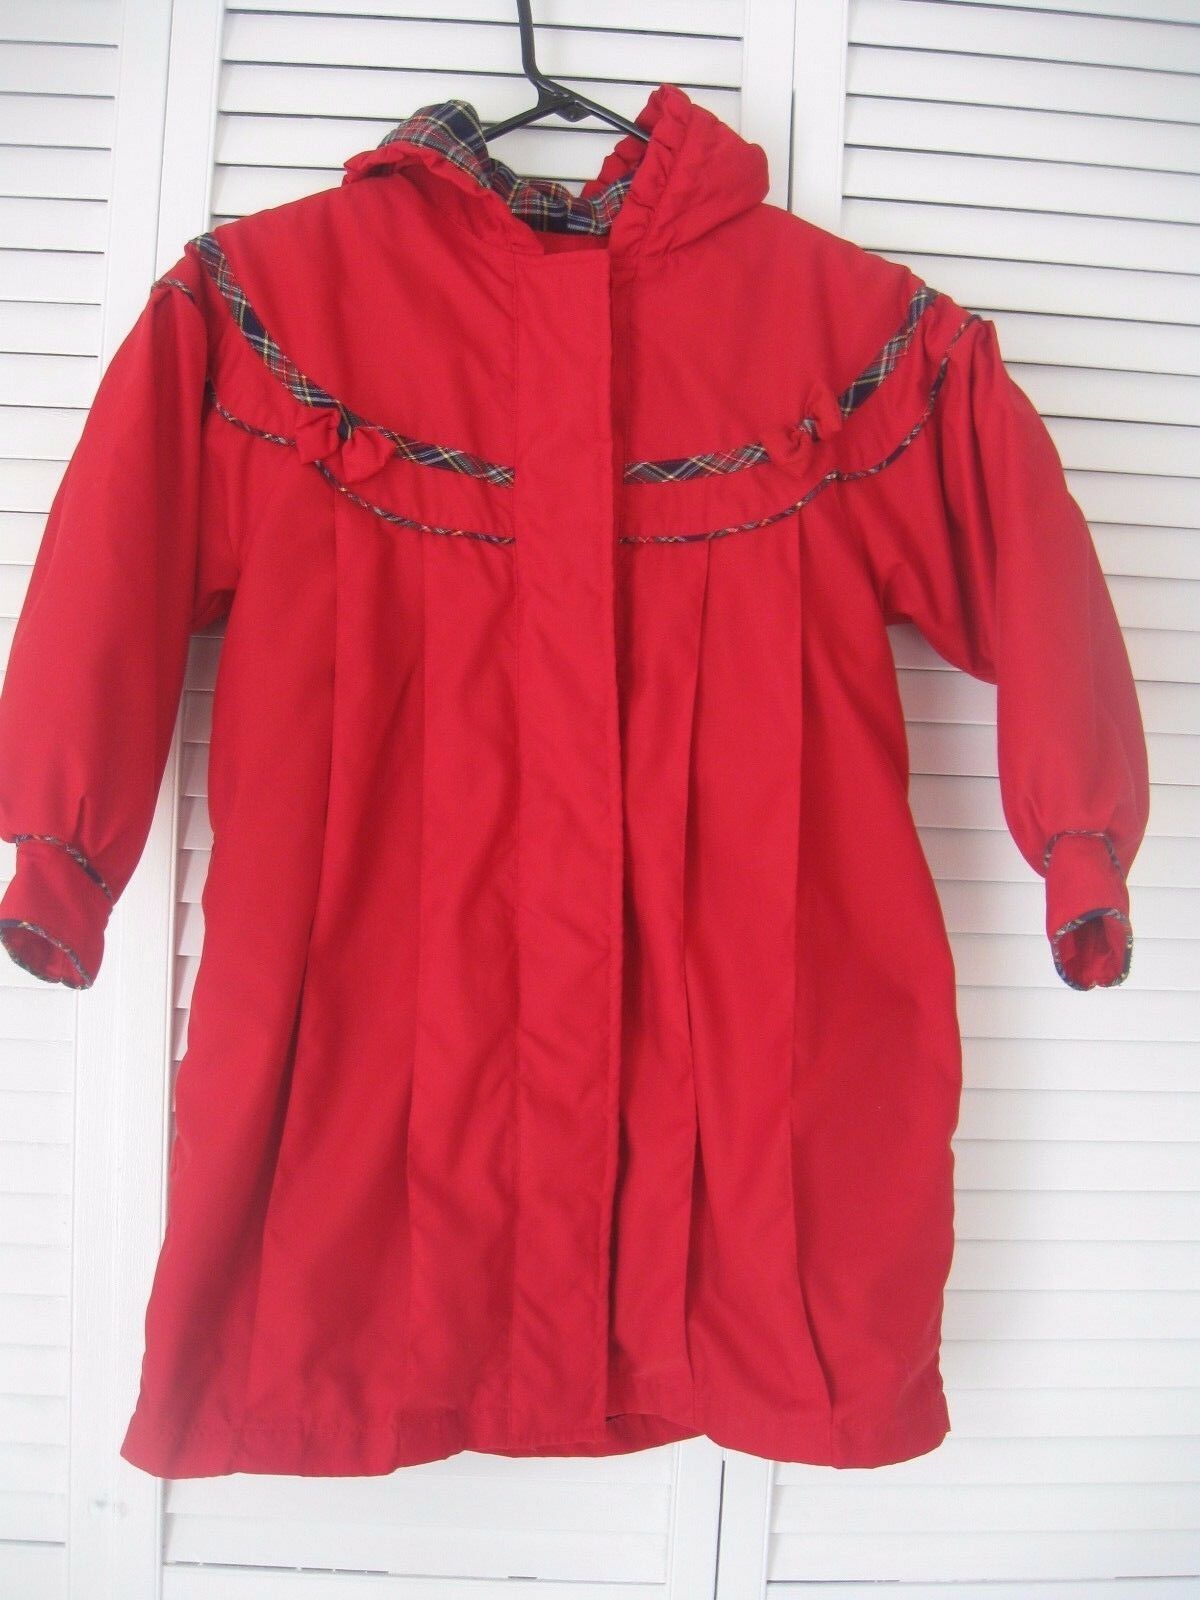 Girls "casual Time" Red Coat With Hood, Size 6x, Zipout Lining, Button Front